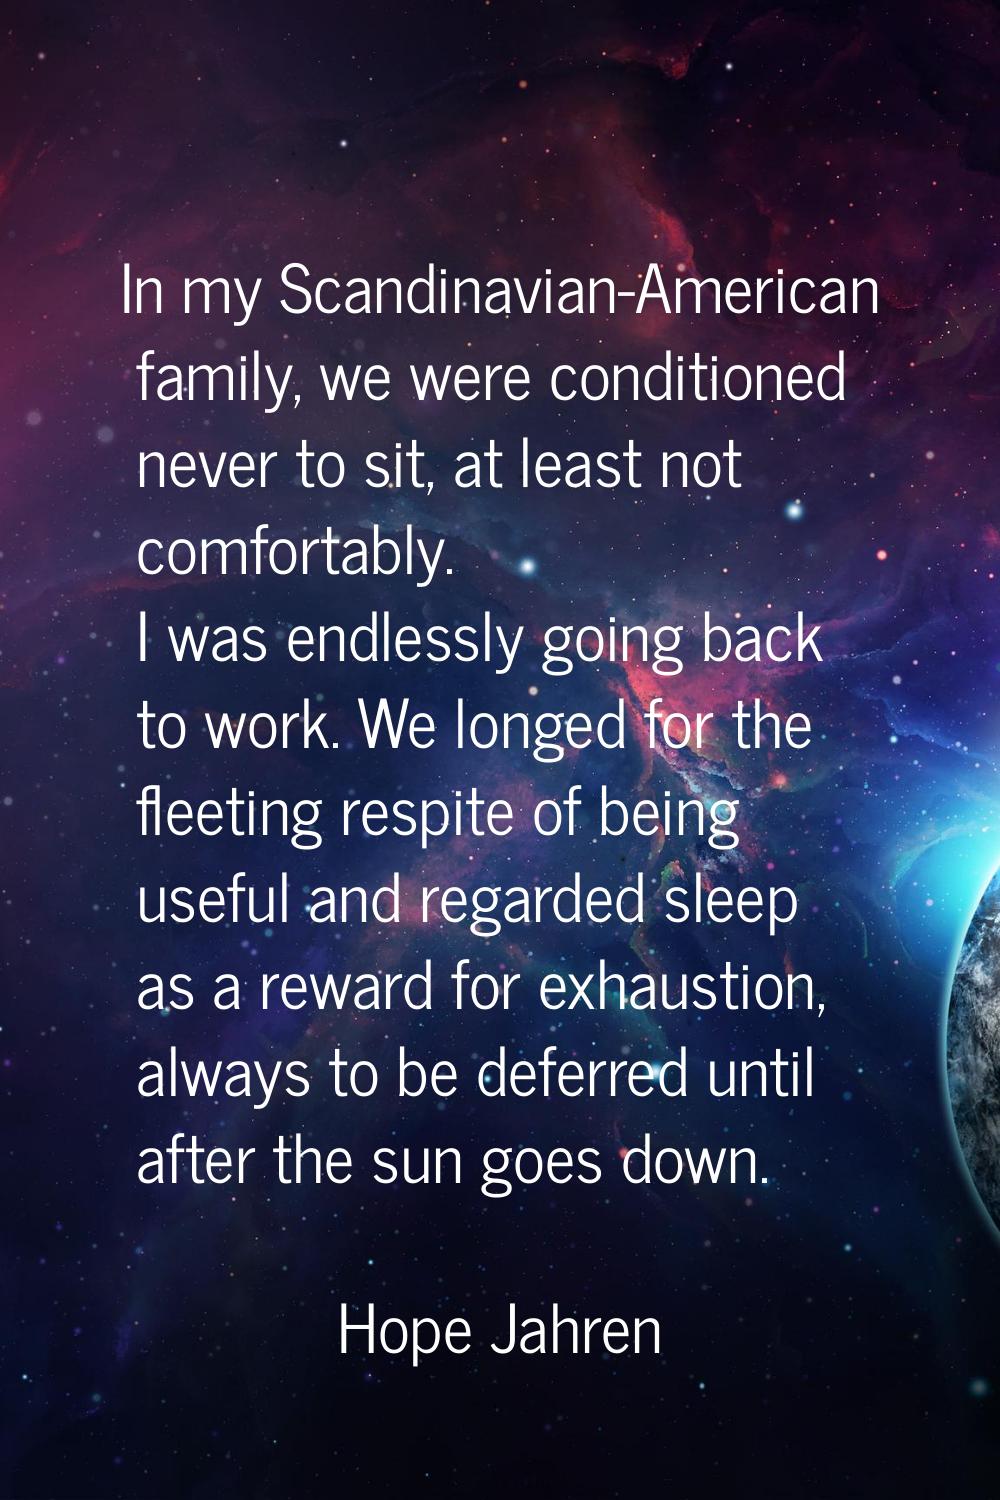 In my Scandinavian-American family, we were conditioned never to sit, at least not comfortably. I w